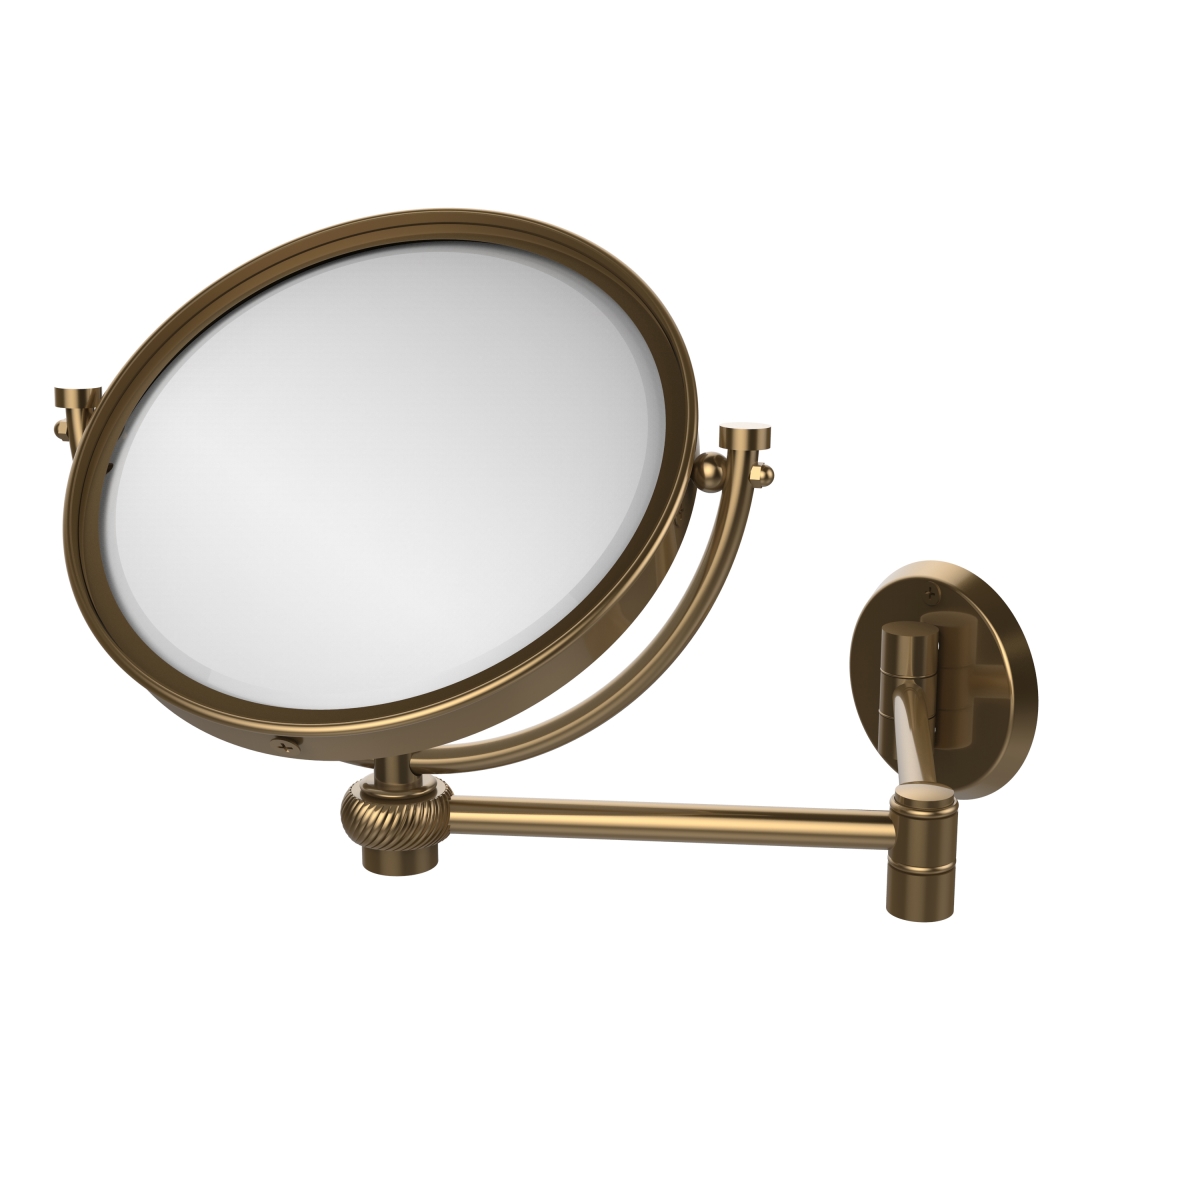 WM-6T-2X-BBR 8 in. Wall Mounted Extending Make-Up Mirror 2X Magnification with Twist Accent, Brushed Bronze -  Allied Brass, WM-6T/2X-BBR